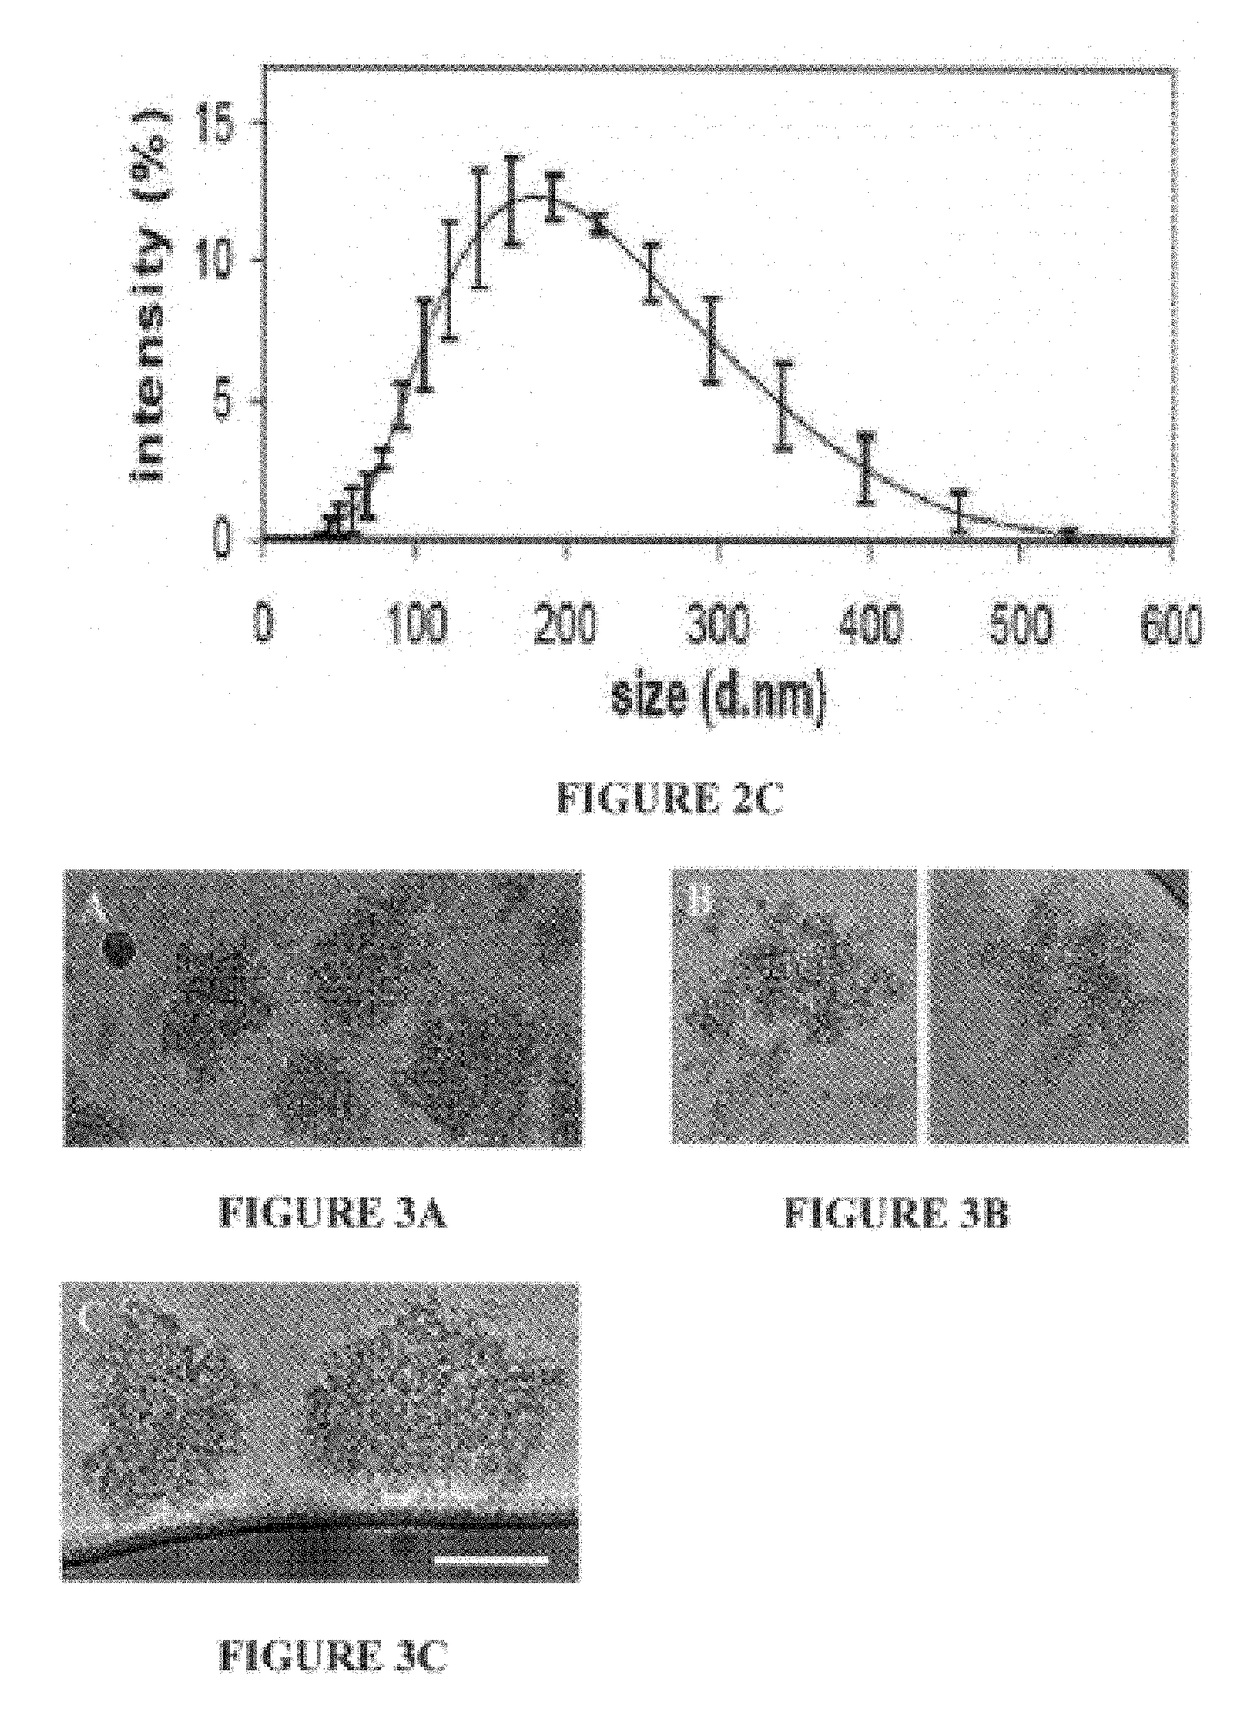 Casein micelles for nanoencapsulation of hydrophobic compounds